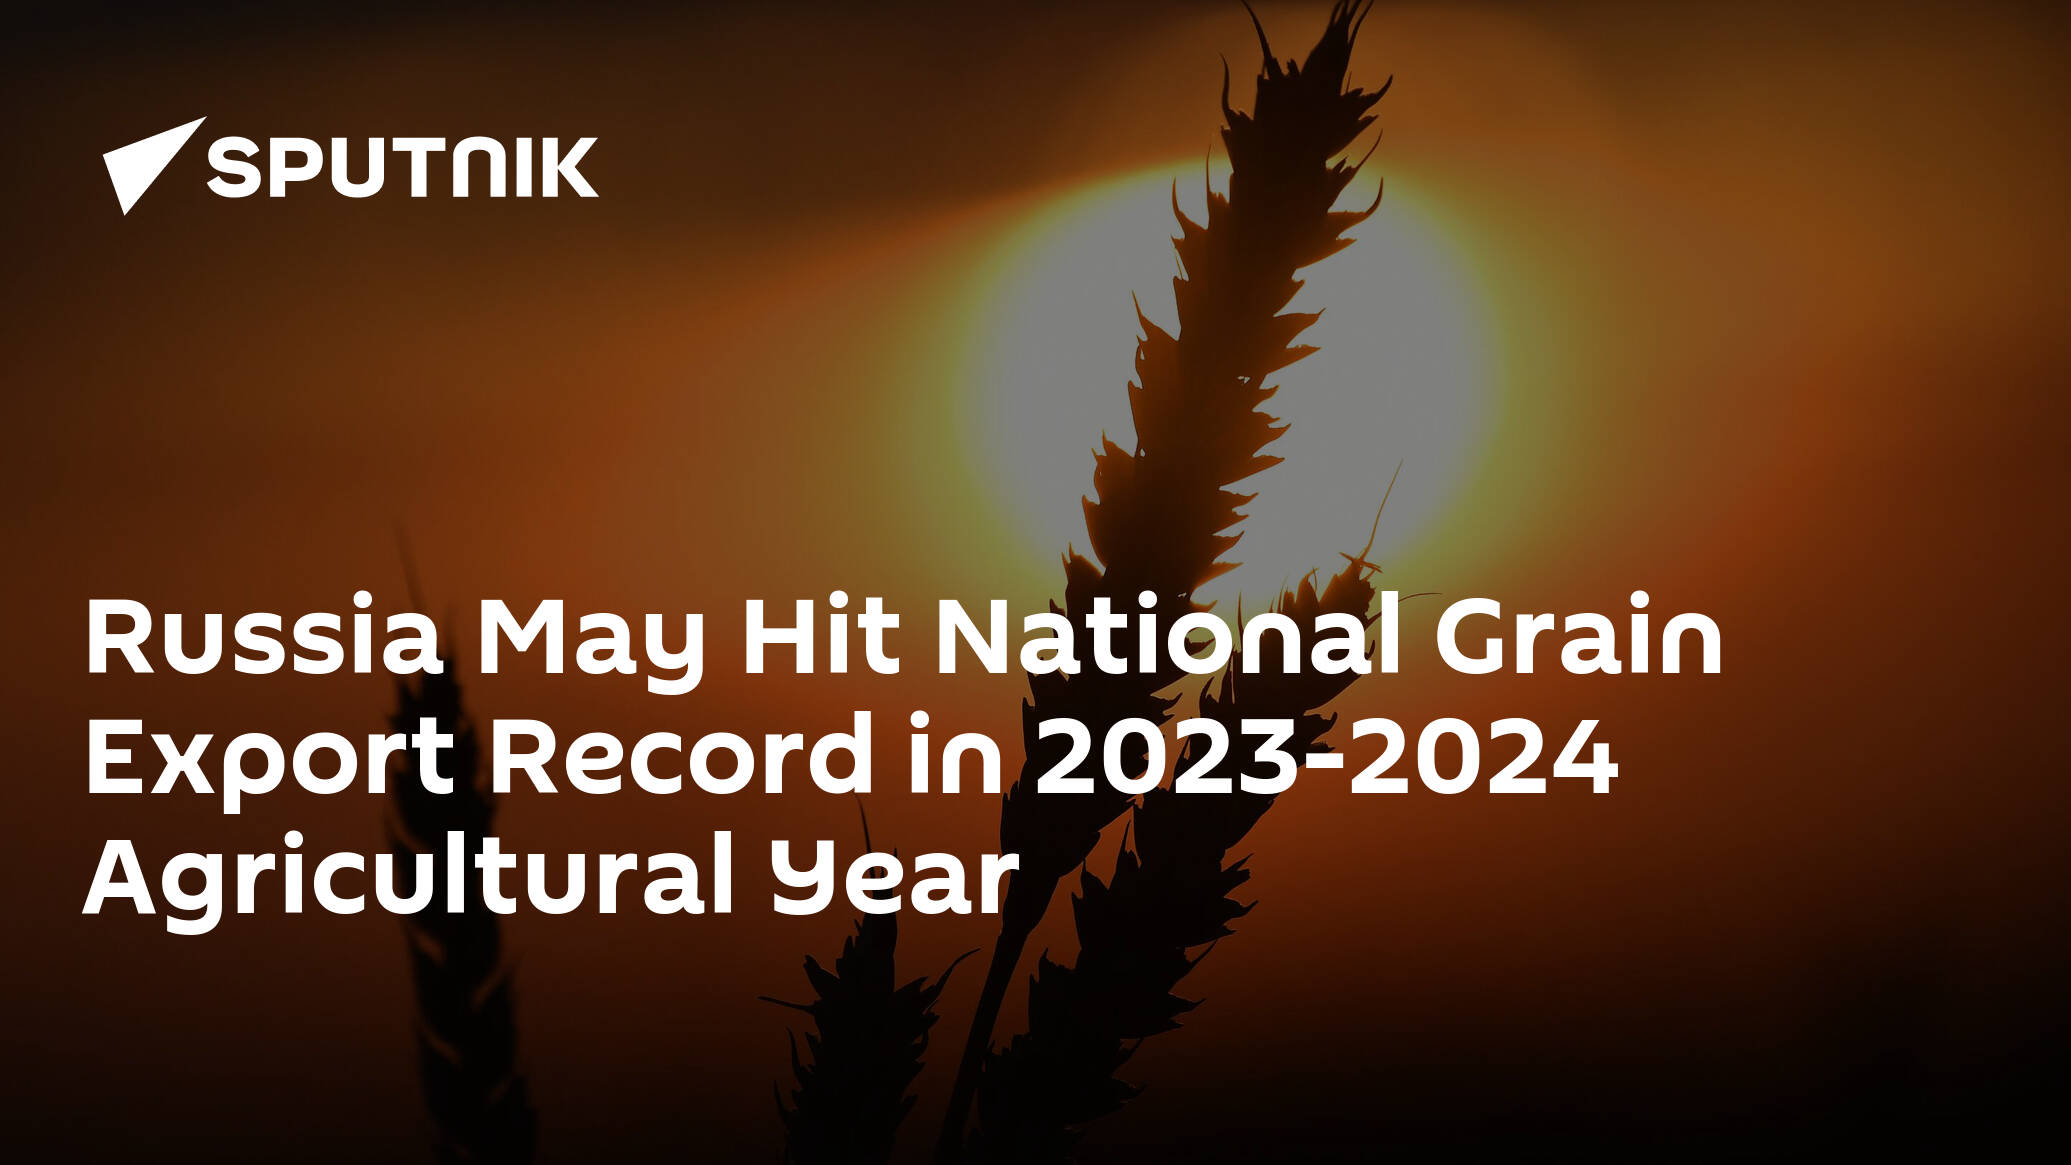 Russia May Hit National Grain Export Record in 2023-2024 Agricultural Year